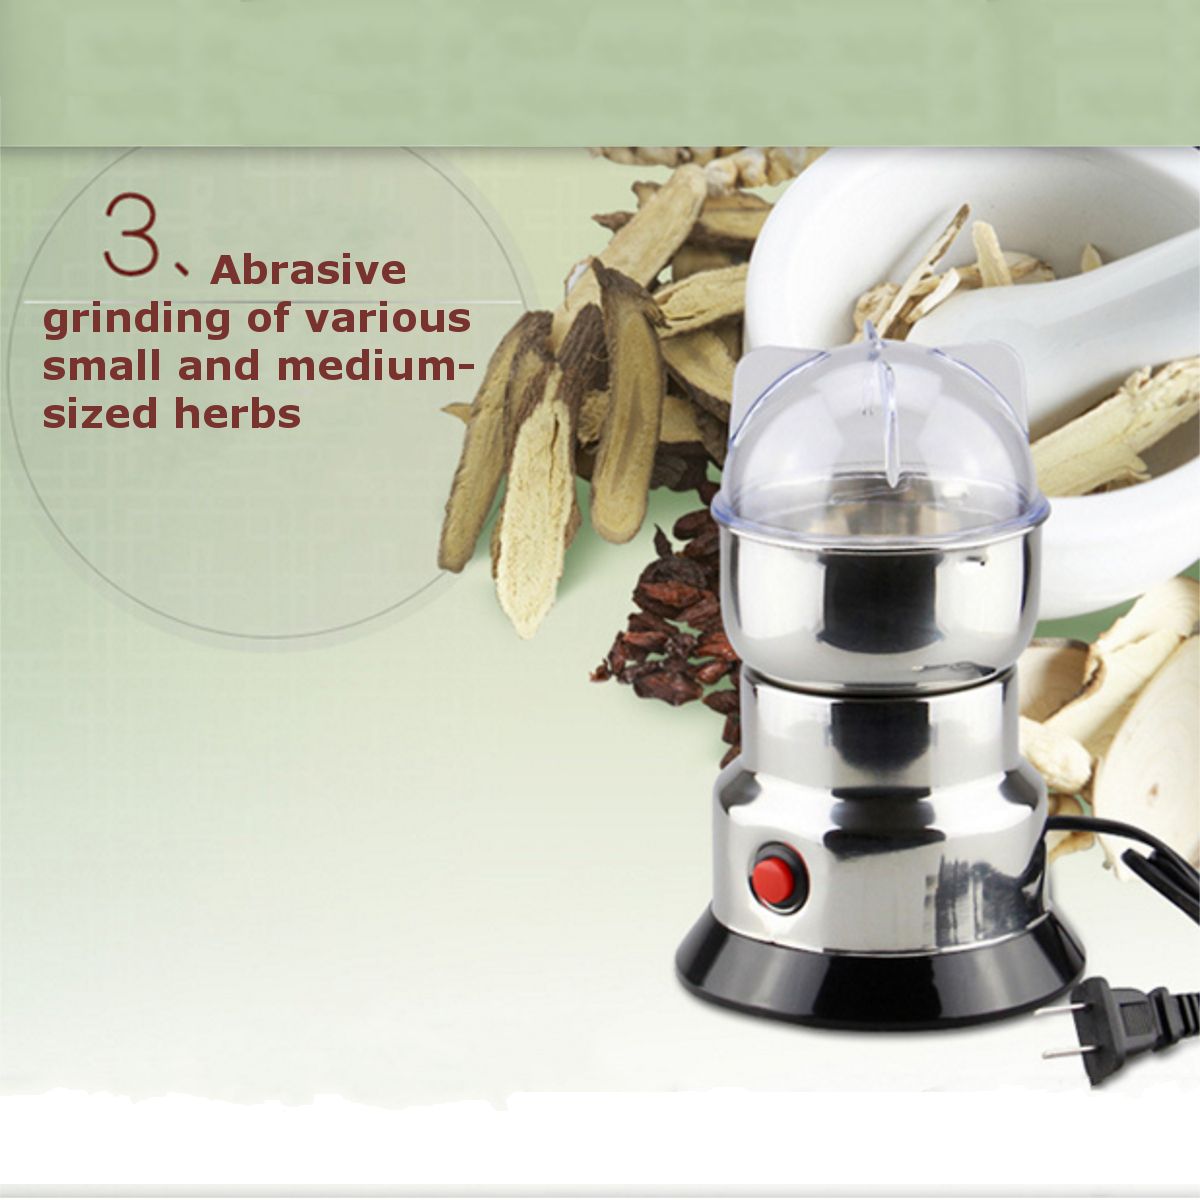 220V-100W-Electric-Herb-Beans-Grain-Coffee-Grinder-Cereal-Mill-Grinding-Machine-1363112